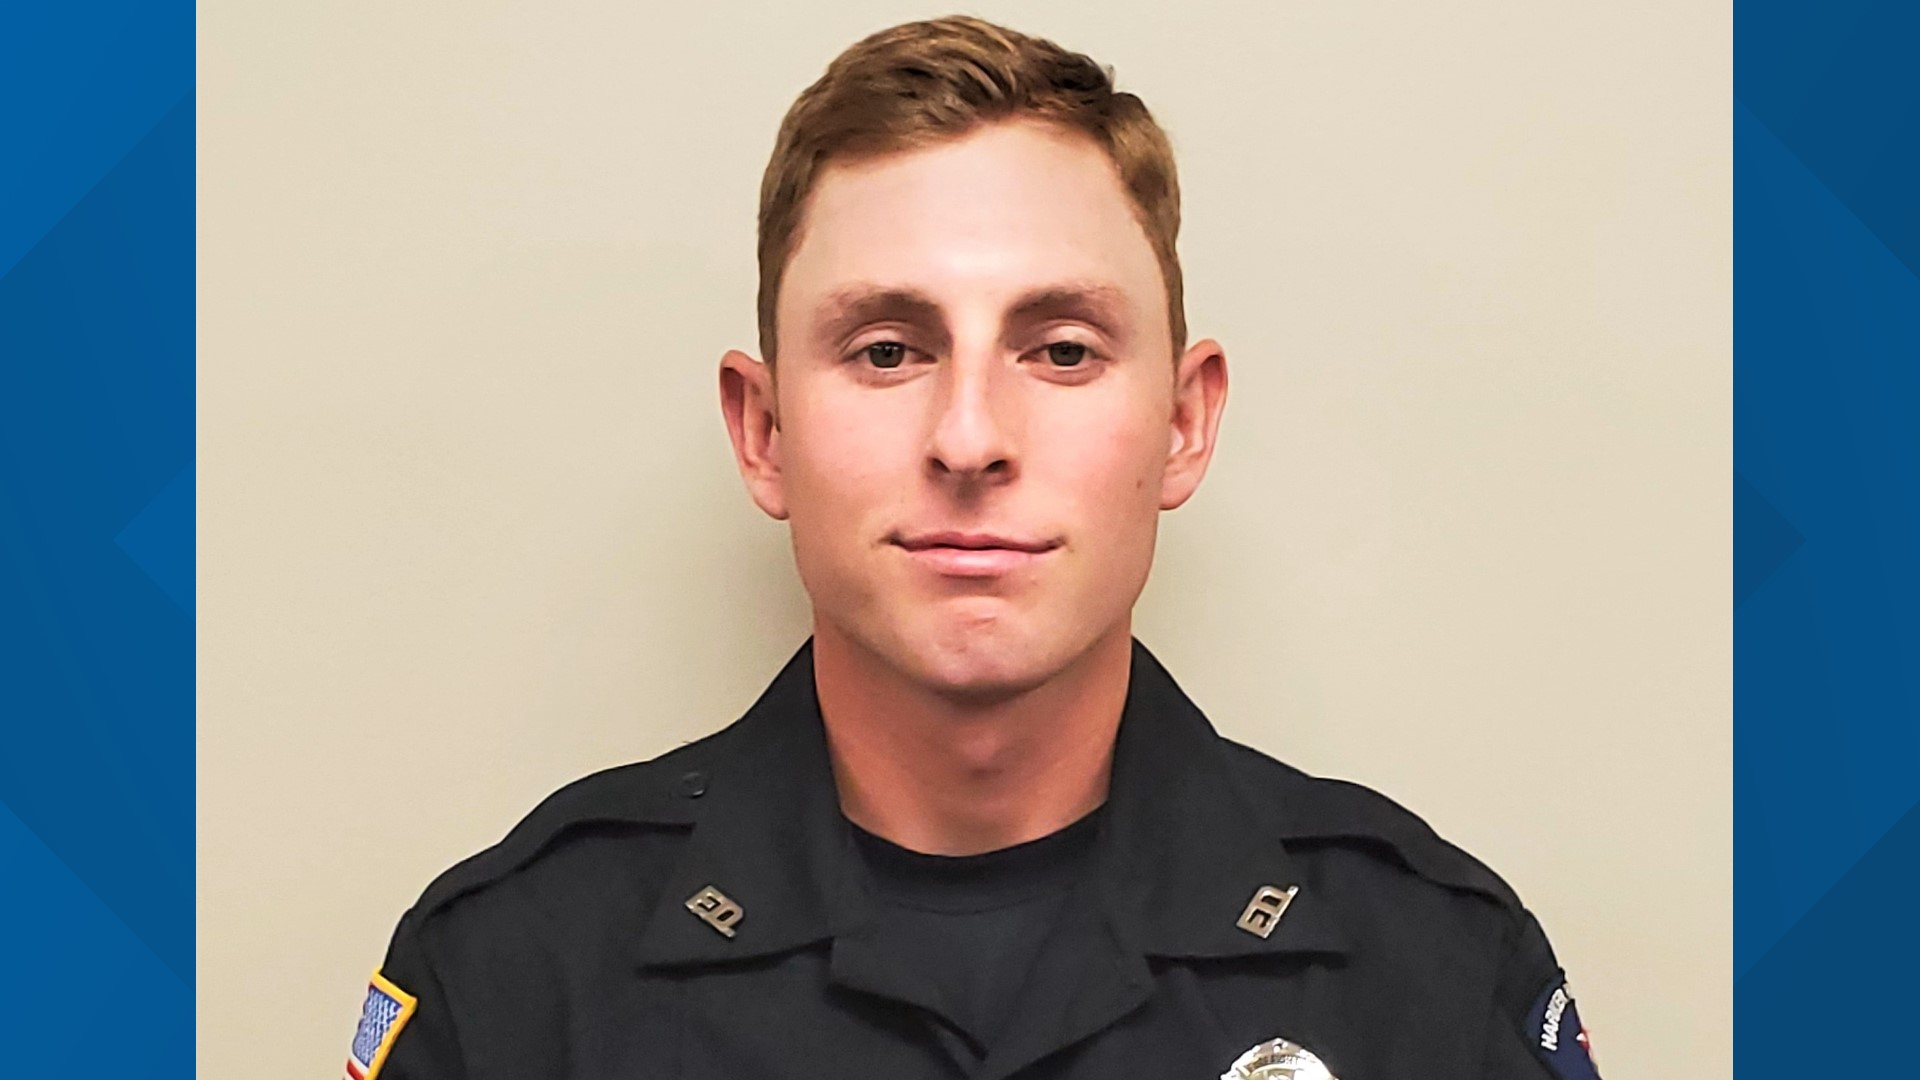 Harker Heights Firefighter Cole Hagen Simmons was off-duty when killed in an early morning vehicle crash on Nov. 30, according to officials.